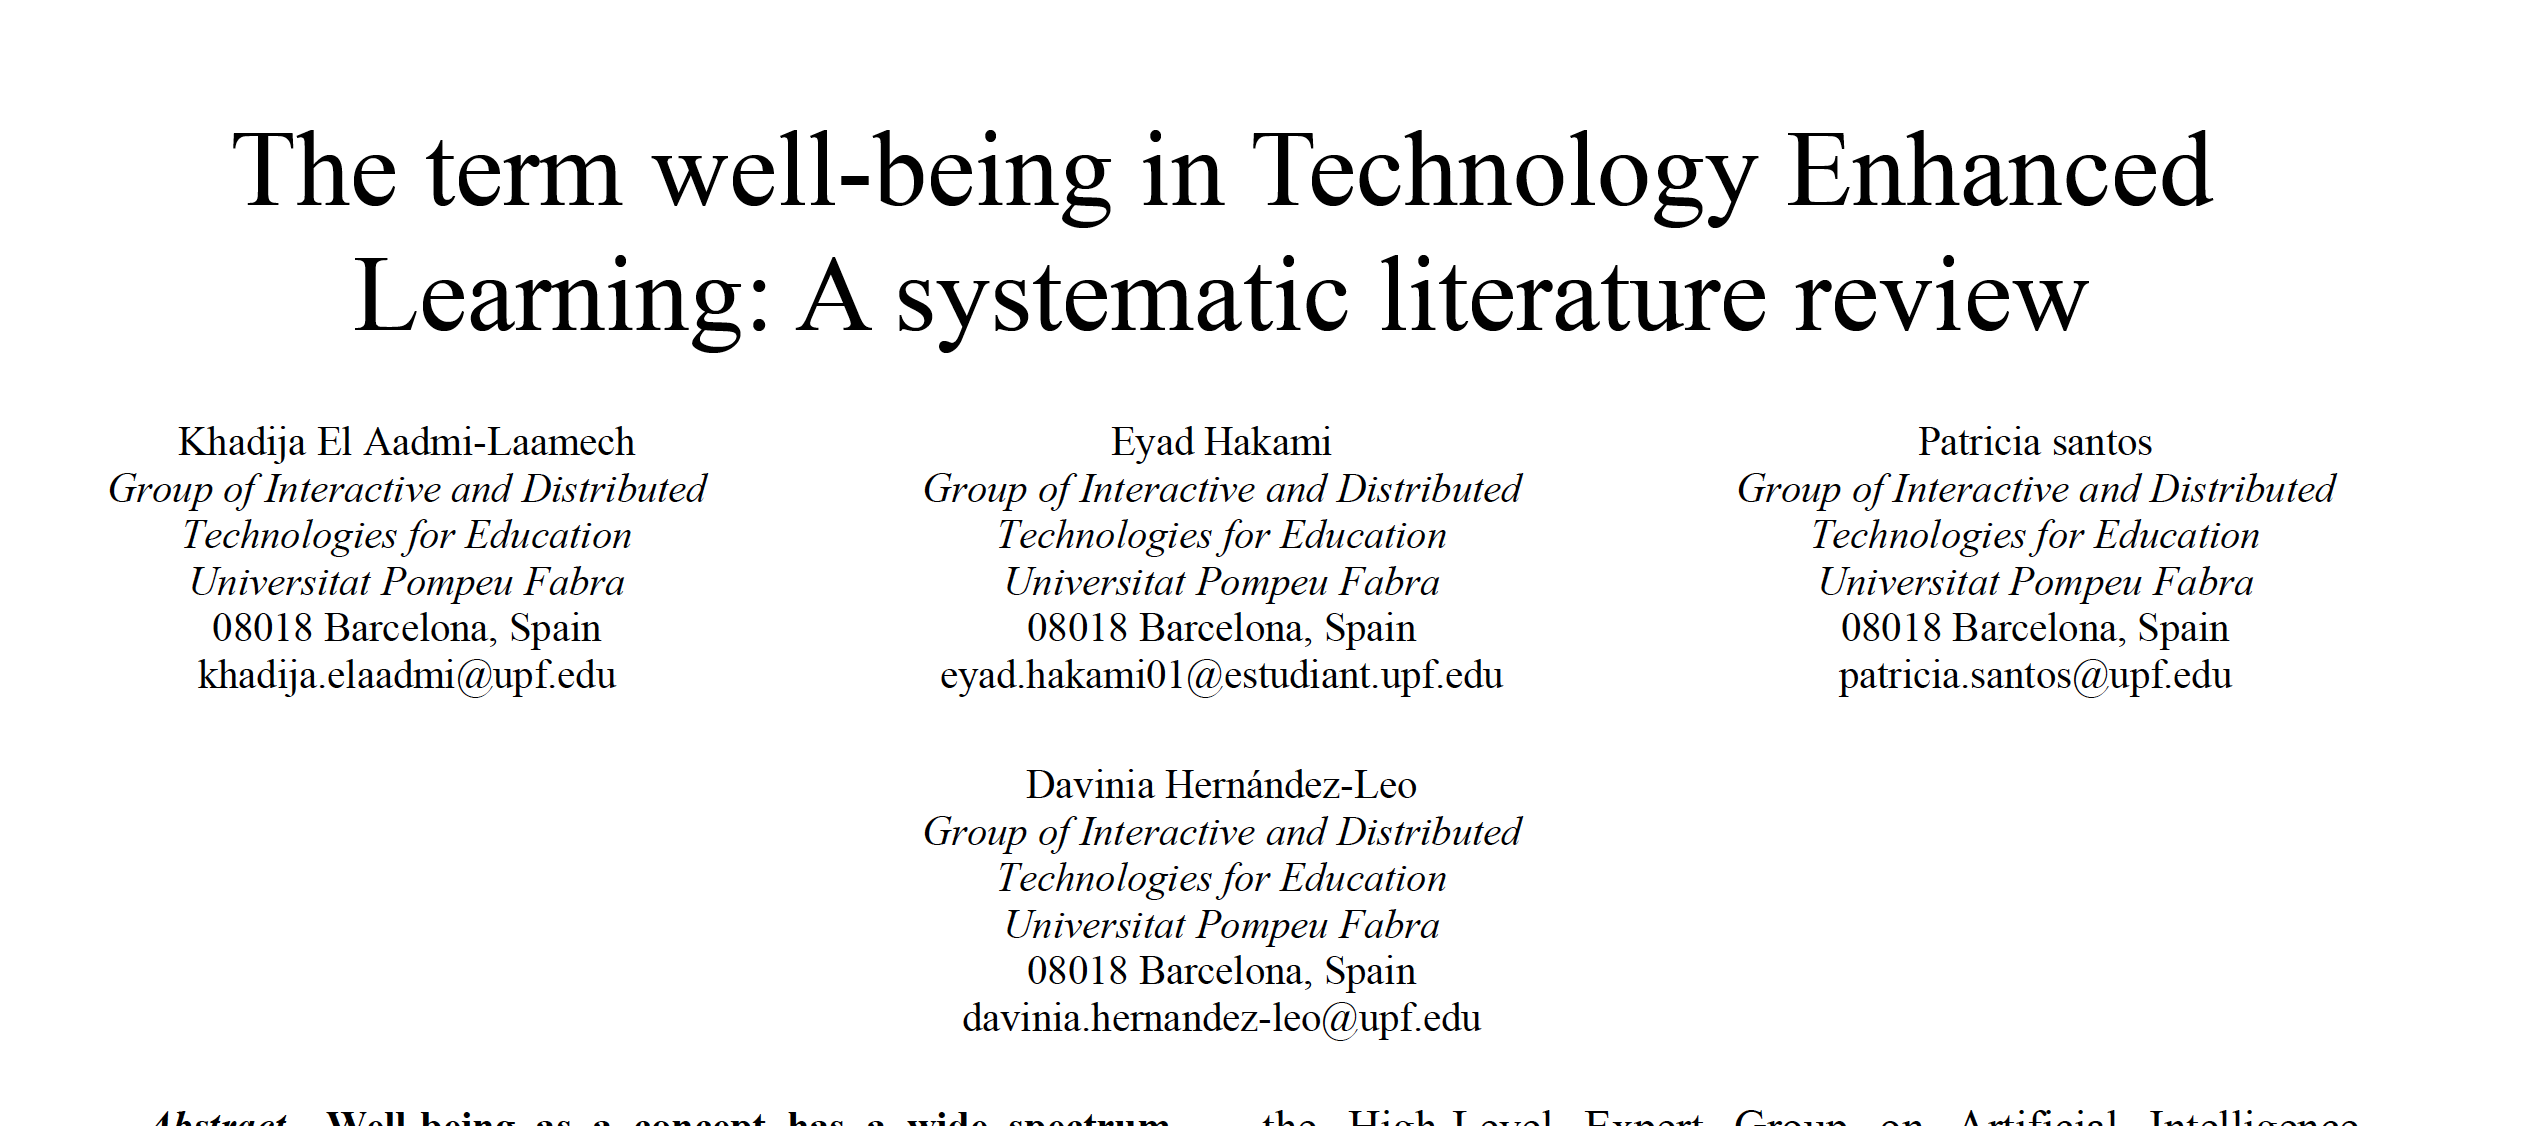 The term well-being in Technology Enhanced Learning: A systematic literature review